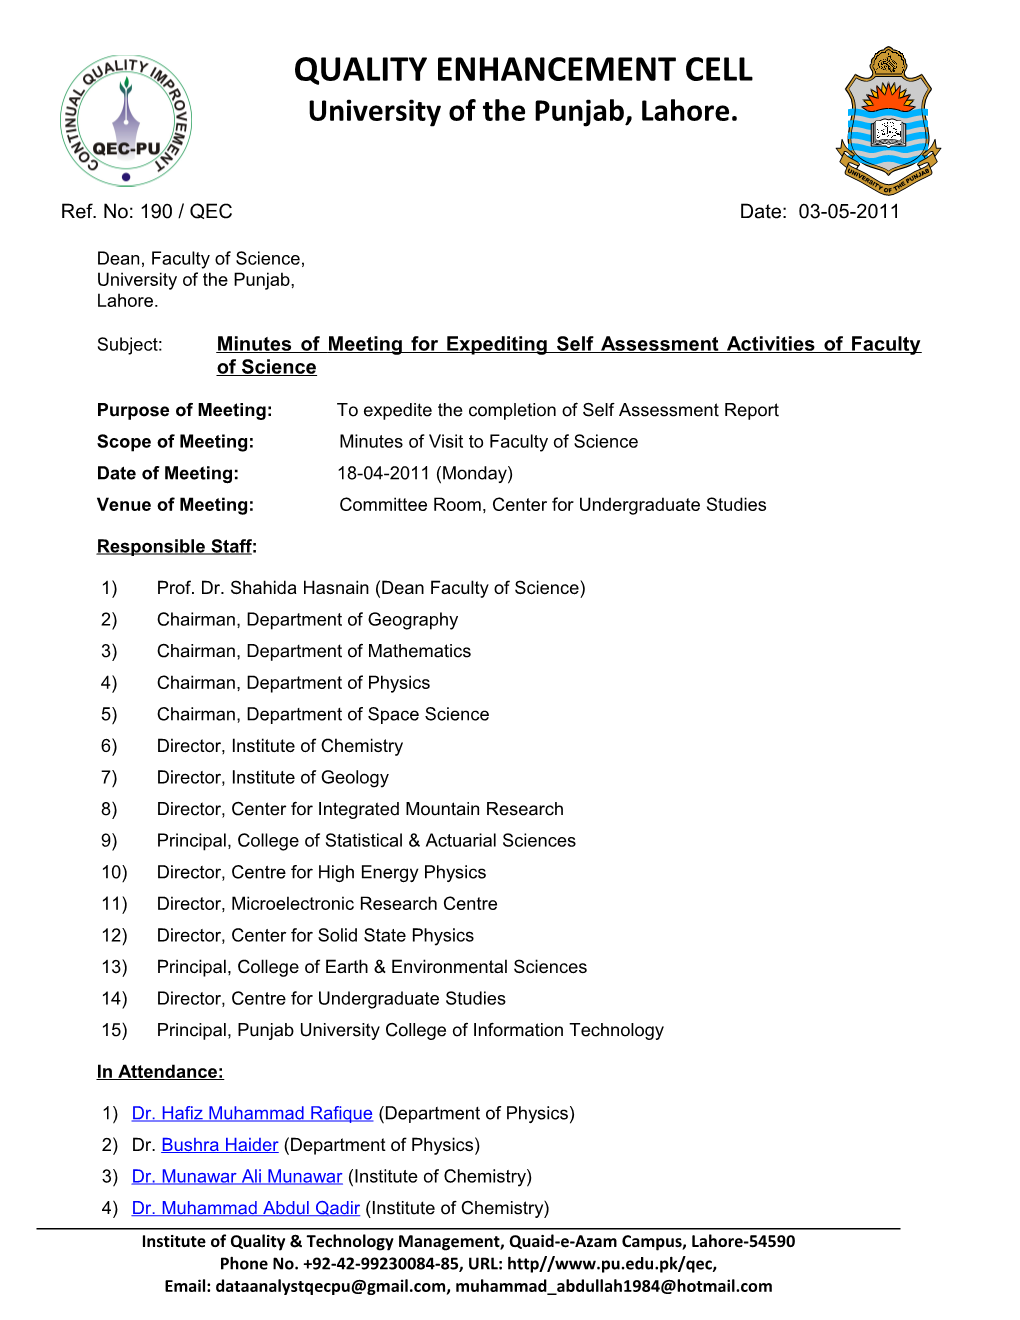 Subject: Minutes of Meeting for Expediting Self Assessment Activities of Faculty of Science